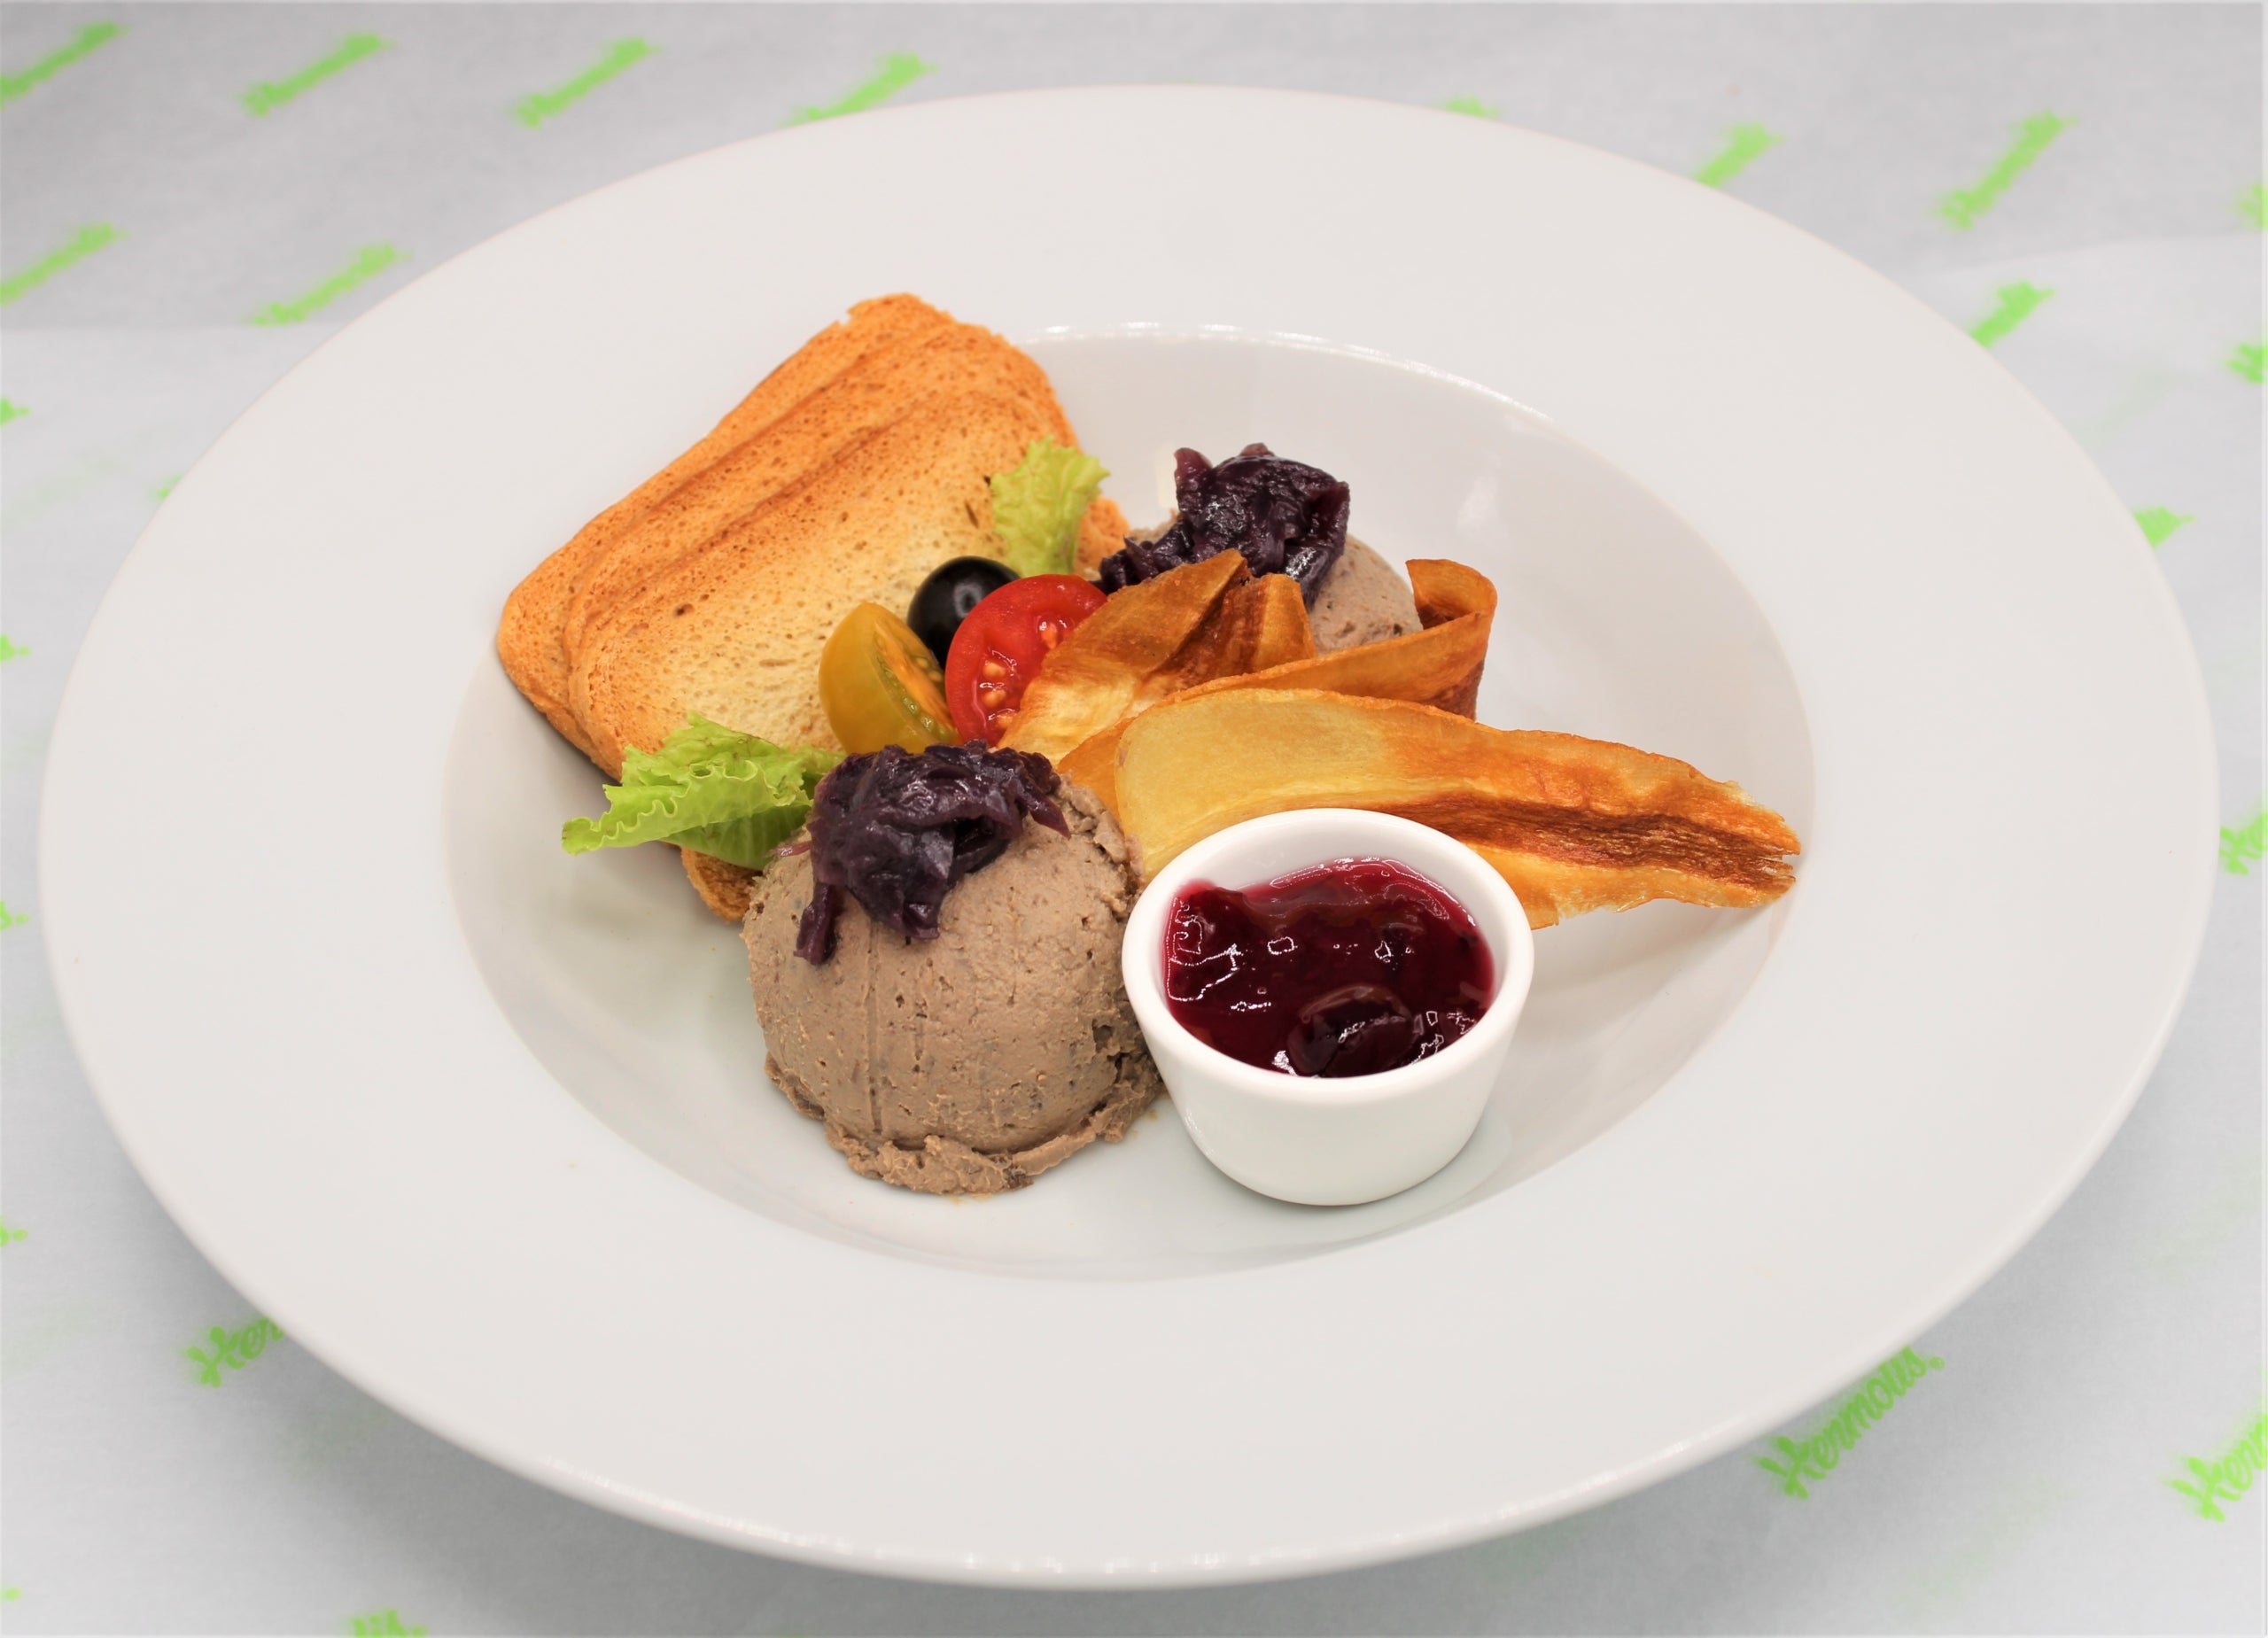 Chicken Liver Pate served with Melba Toast and vegetable crisps